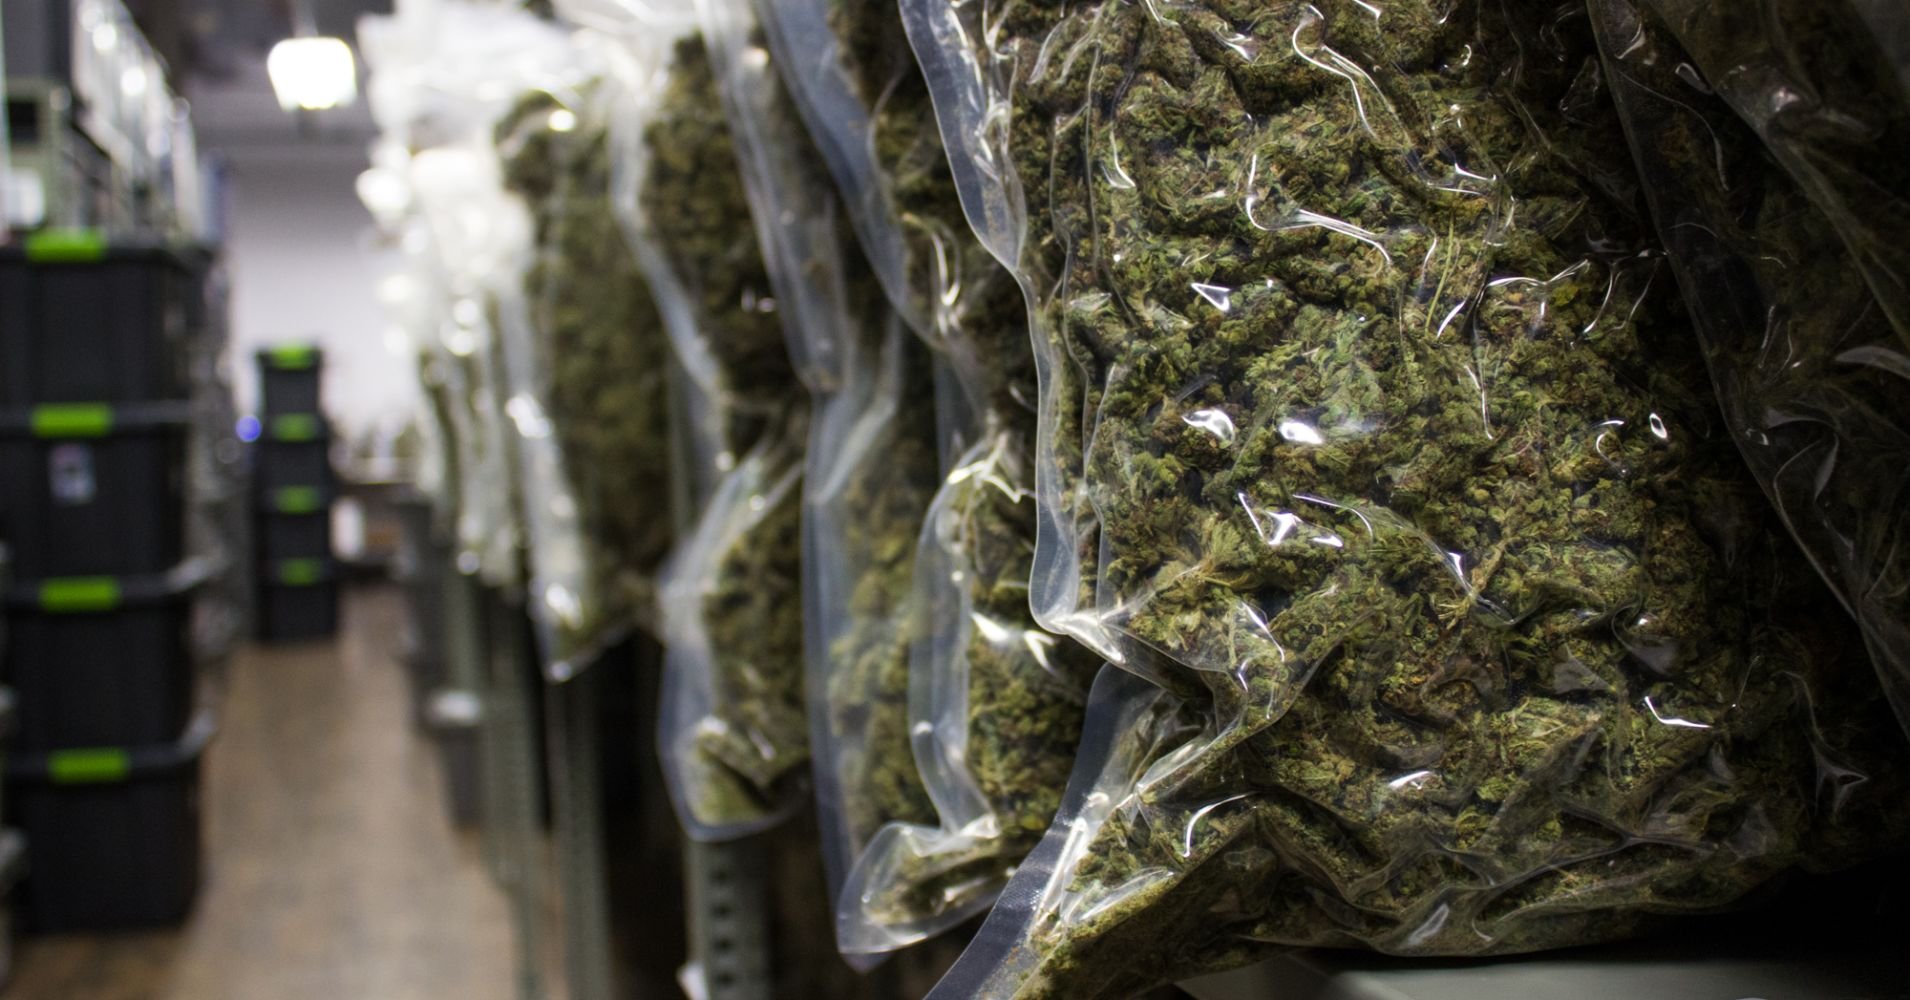 Latest states turning to legal marijuana for tax revenue aren't charging enough, critics say